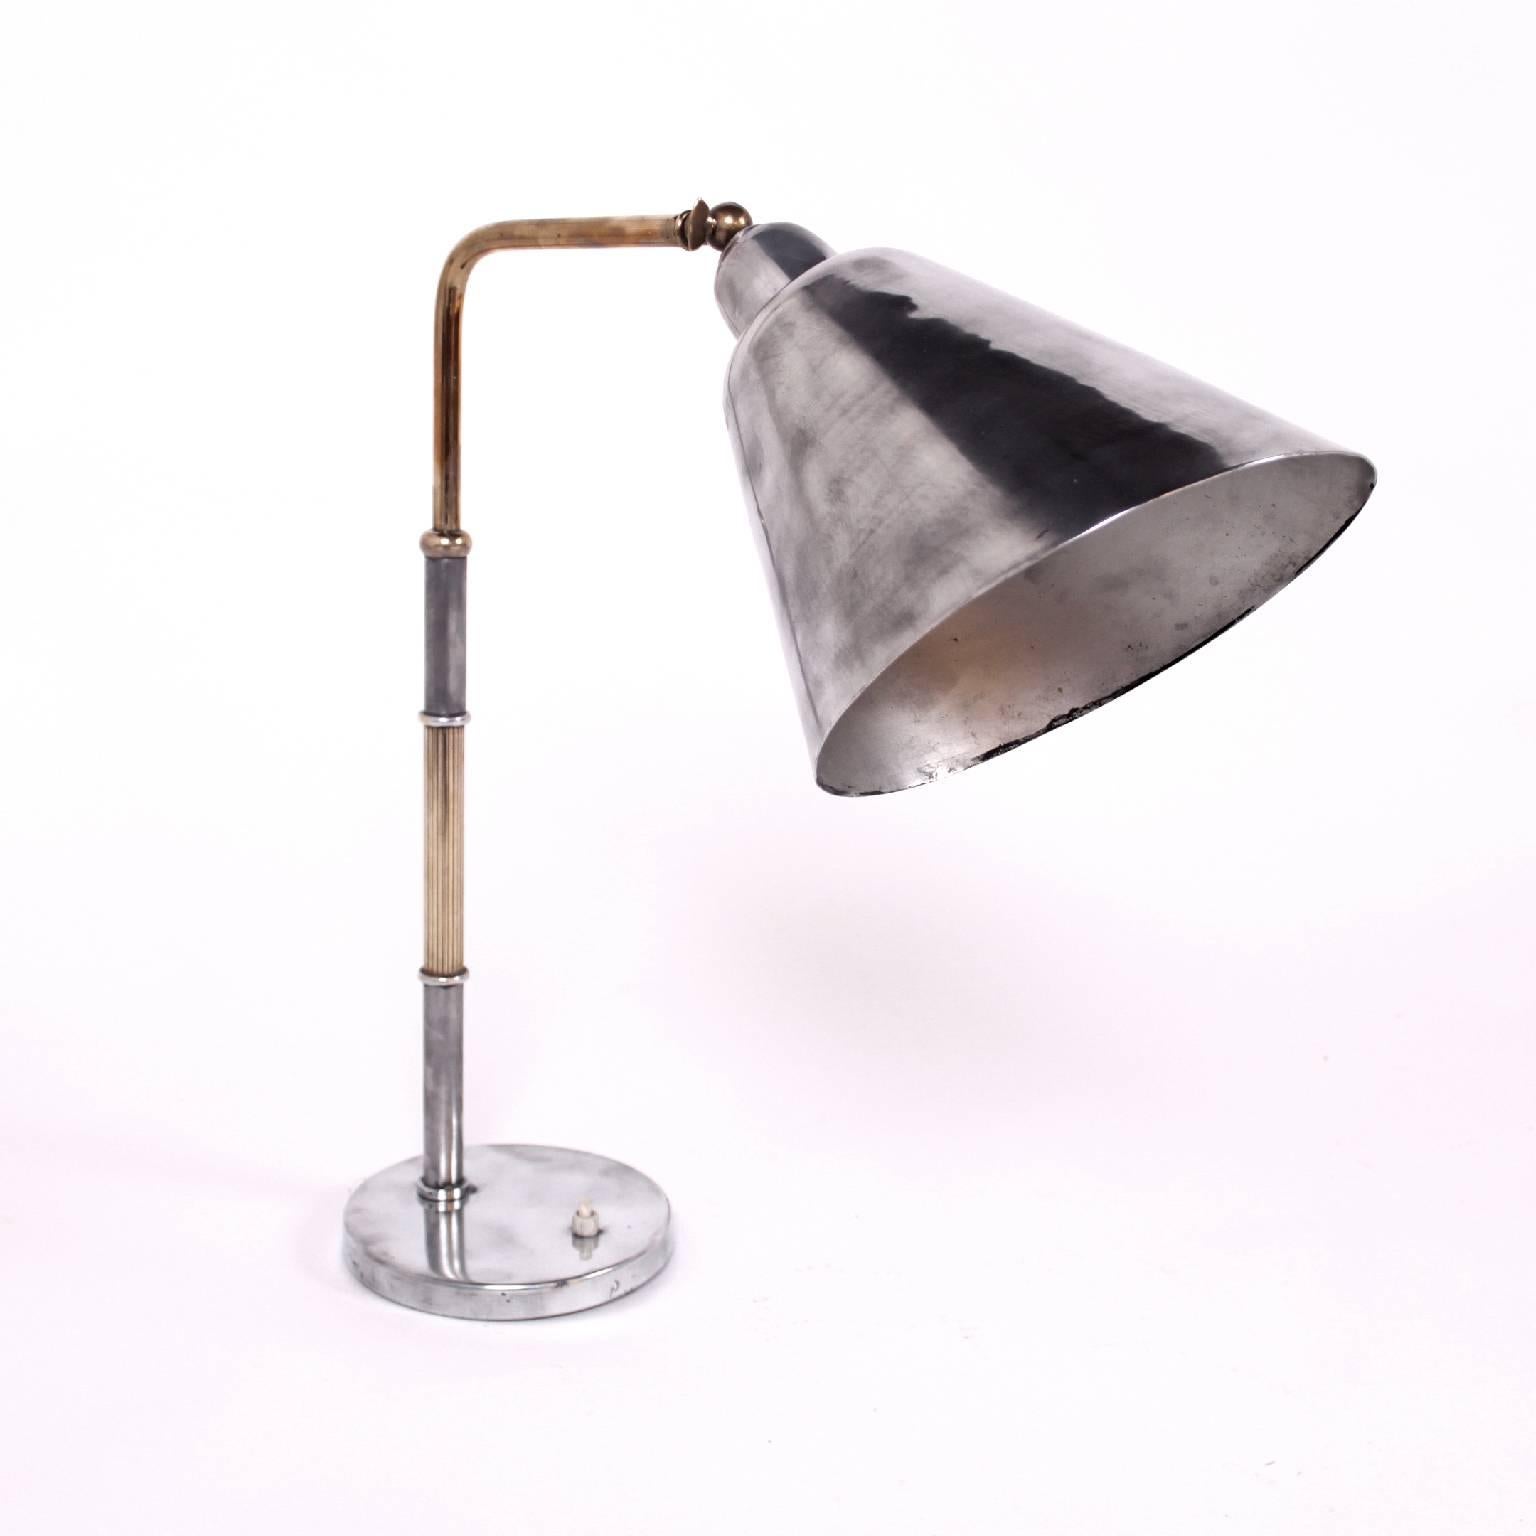 Table lamp with adjustable shade.
Materials: Brass and polished aluminium.
 